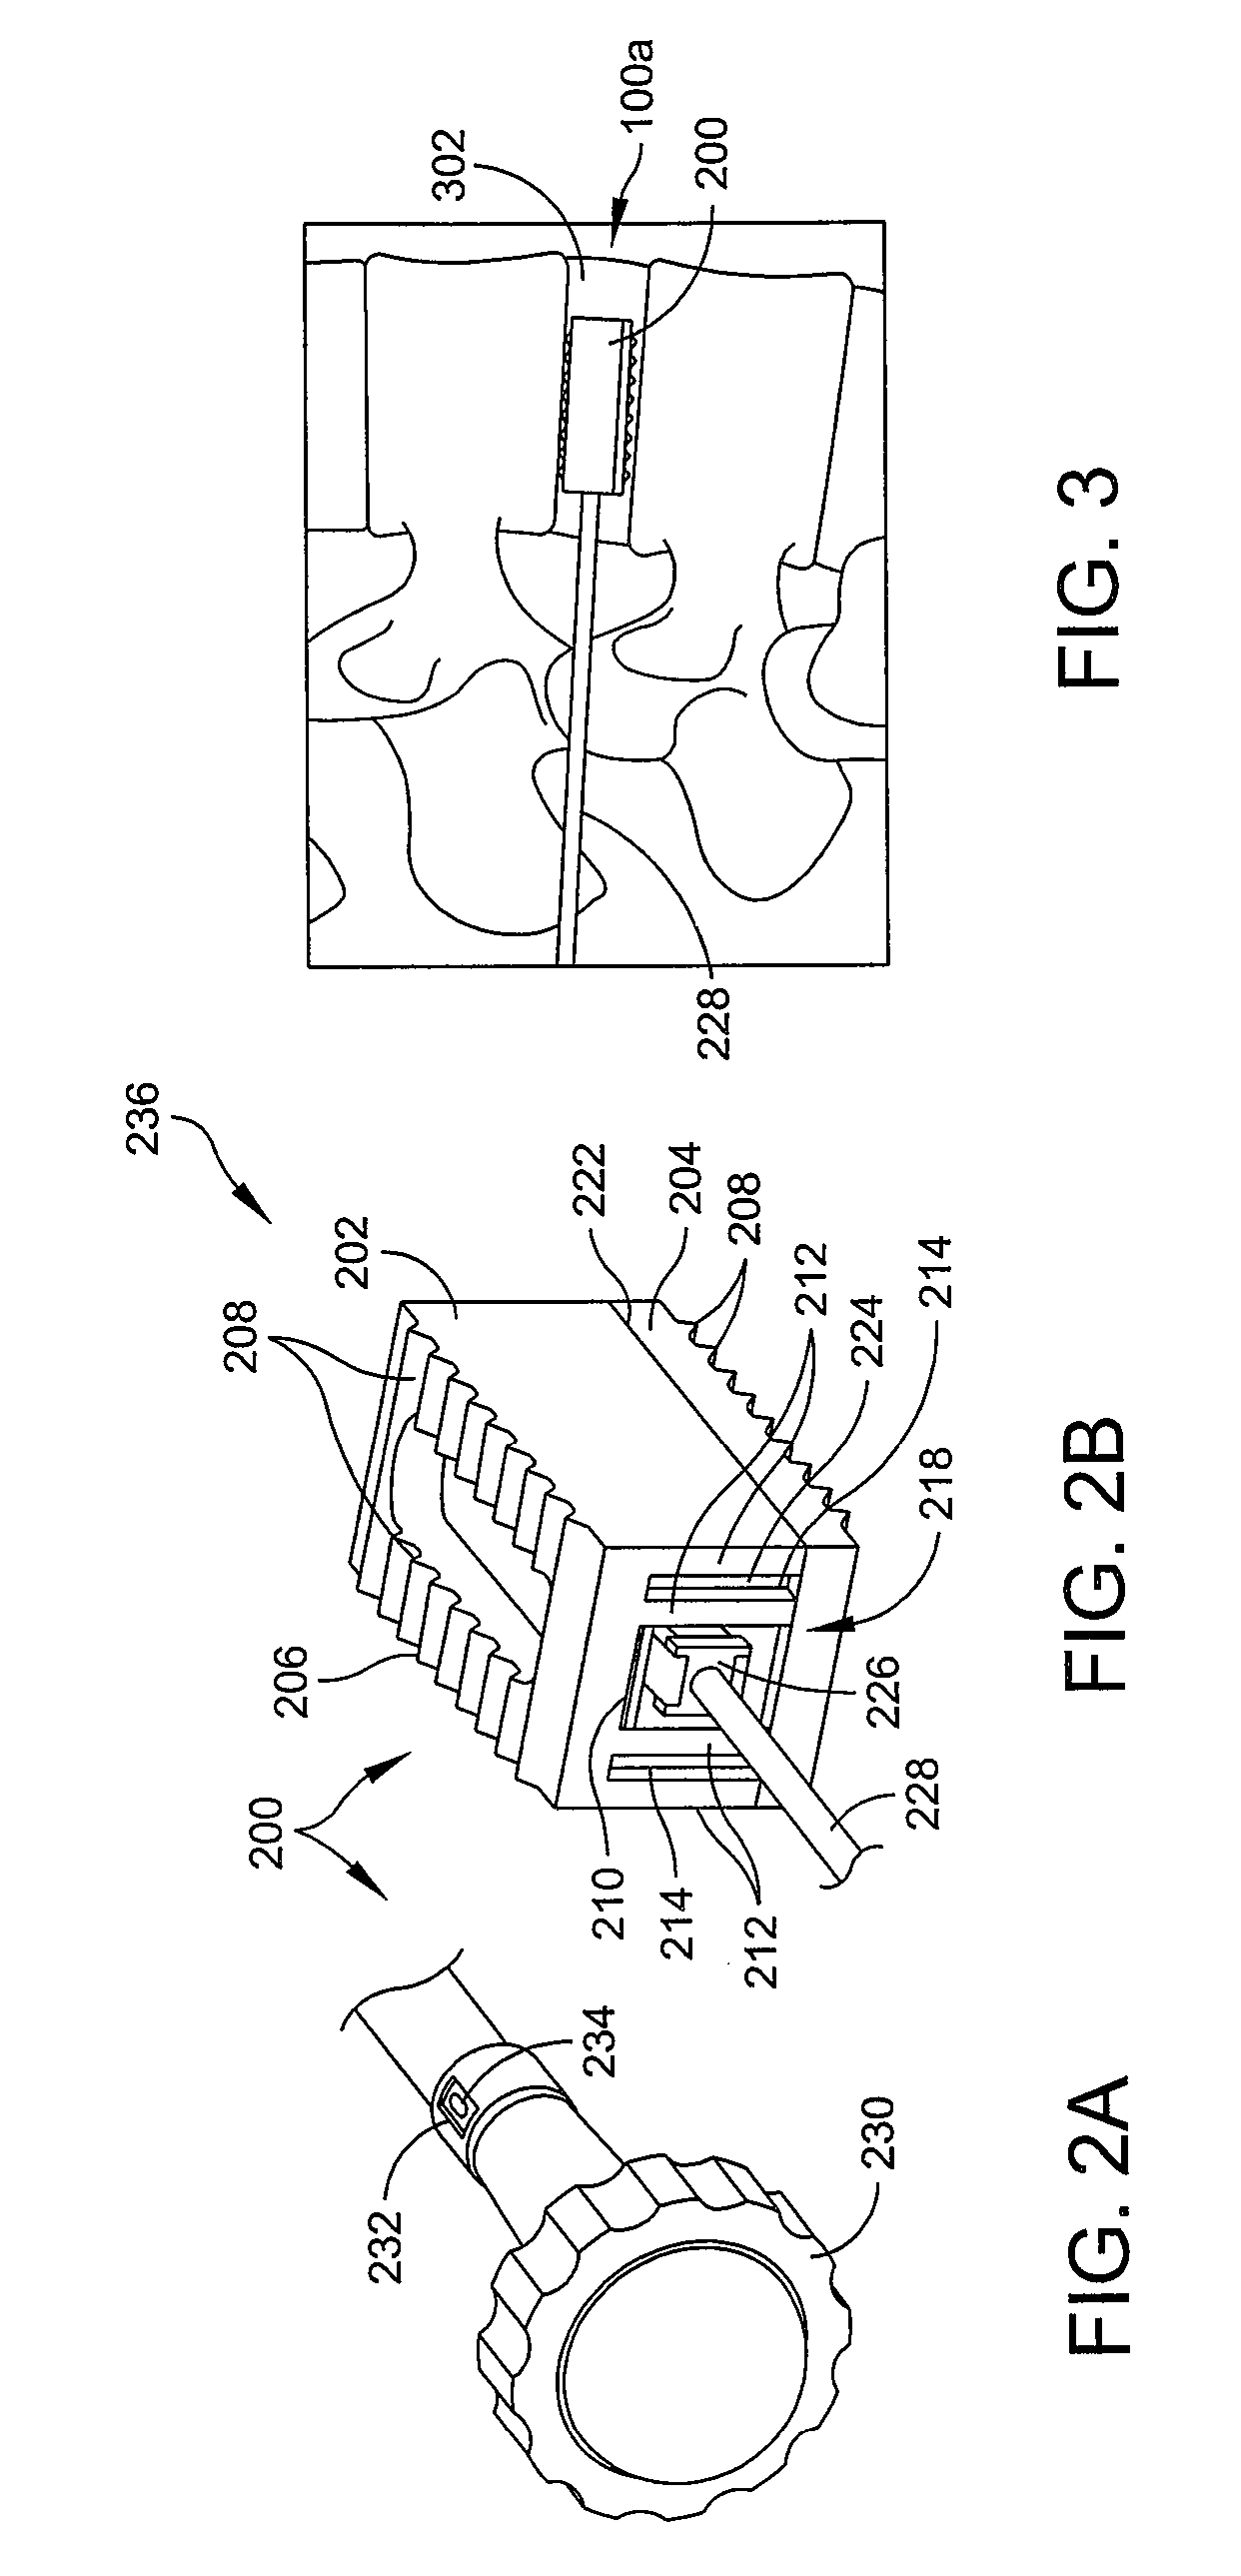 Expandable spinal fusion cage